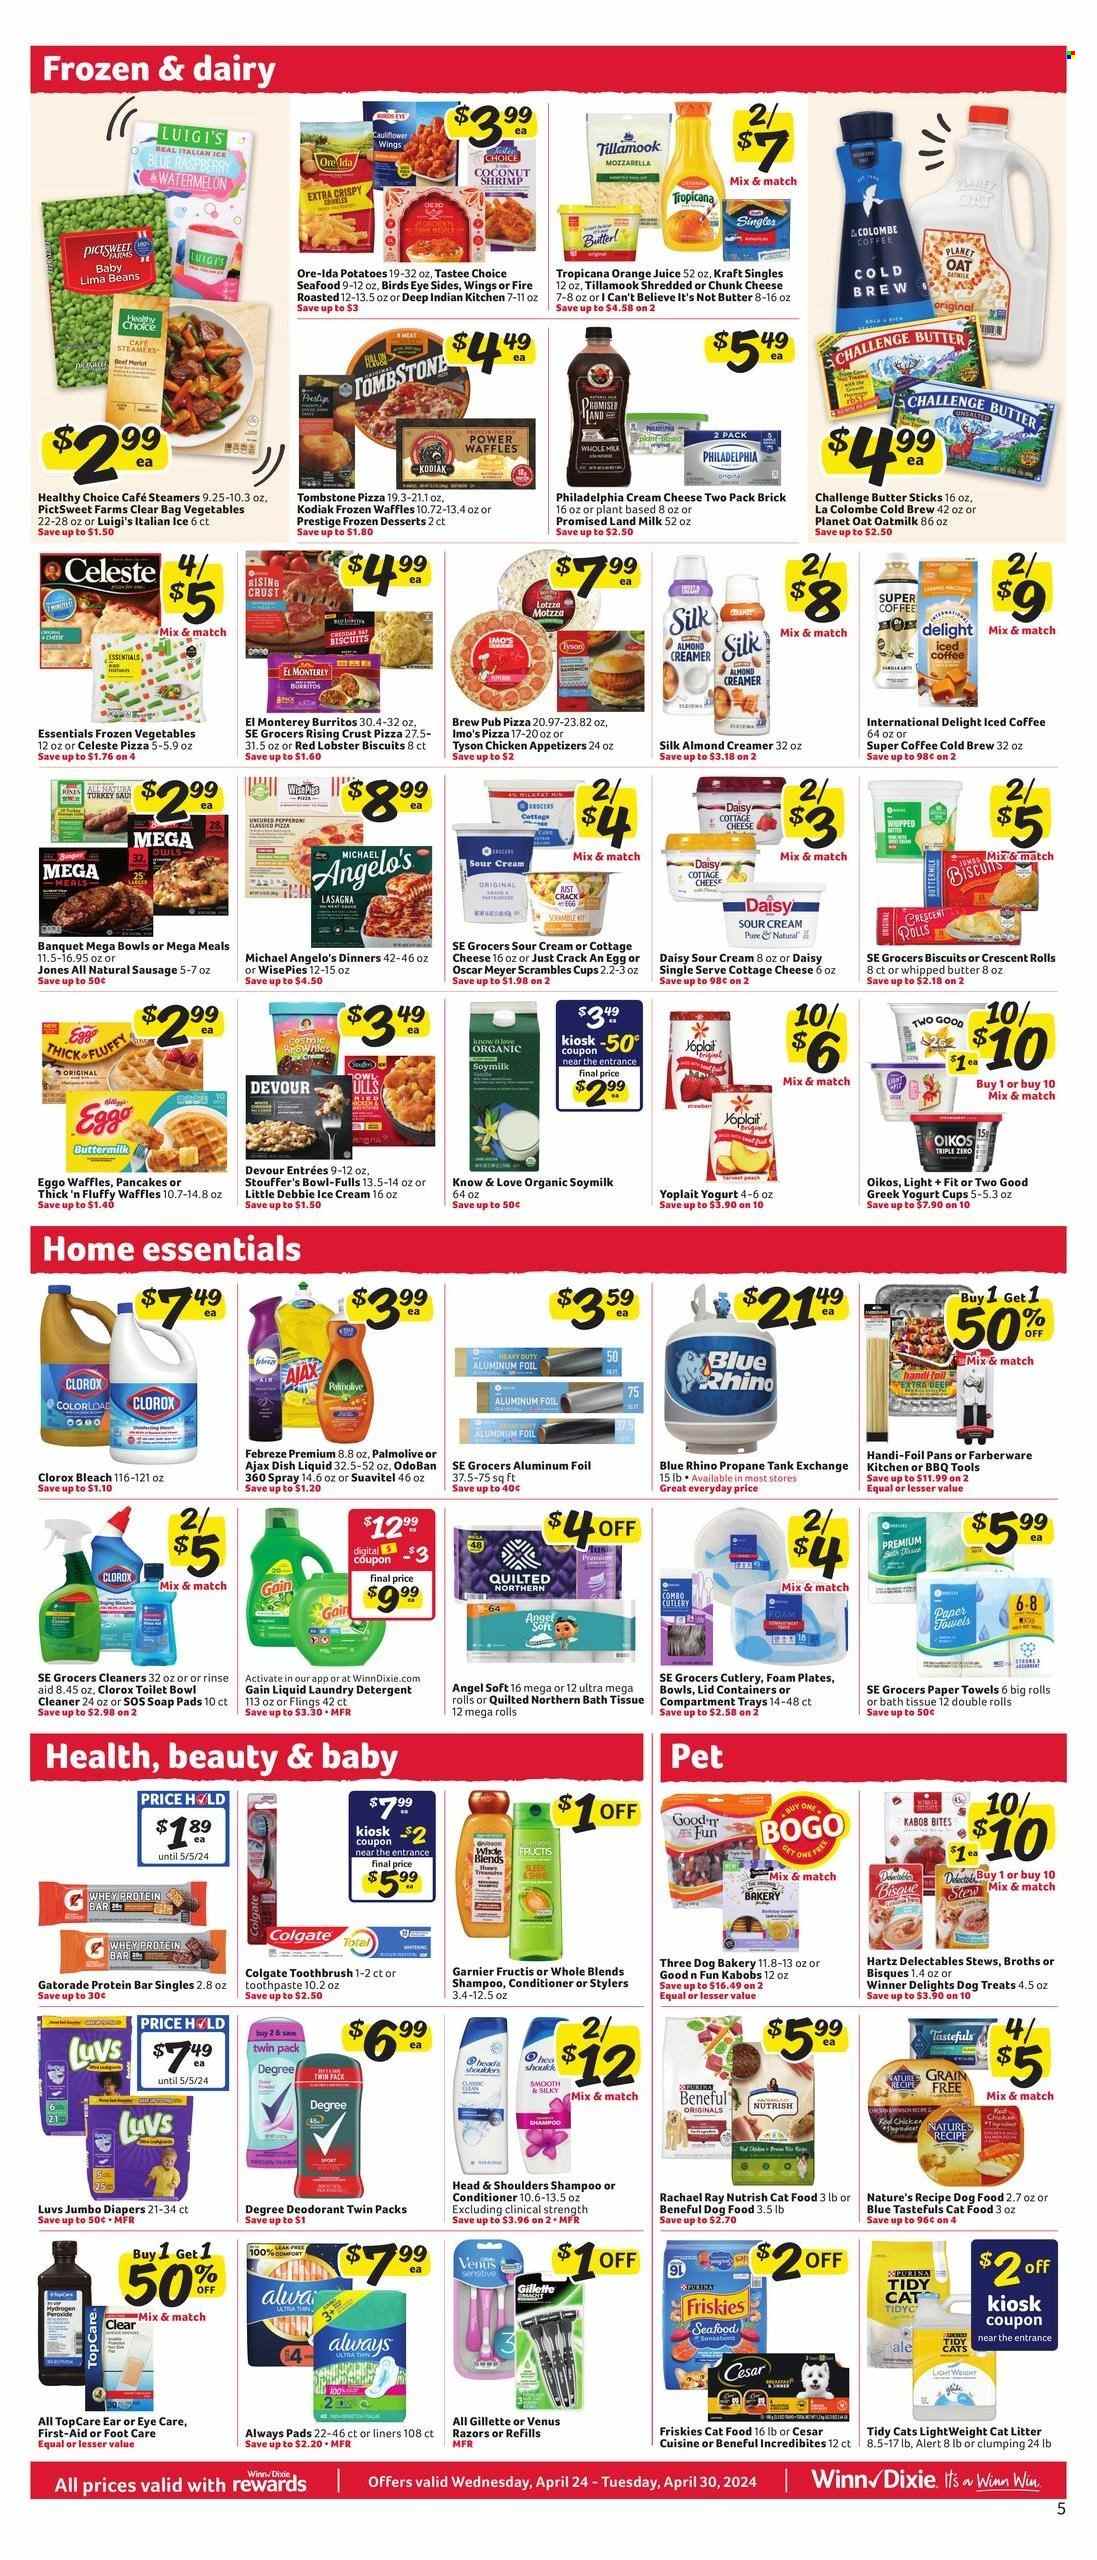 thumbnail - Winn Dixie Flyer - 04/24/2024 - 04/30/2024 - Sales products - ready meal, cottage cheese, cheese, sour cream, cup, iced coffee, coffee drink, pizza, burrito, biscuit, sausage, Silk, creamer, almond creamer, frozen vegetables, Celeste, oat milk, butter, waffles, dessert, Kraft®, sandwich slices, shredded cheese, Kraft Singles, chunk cheese, margarine, I Can't Believe It's Not Butter, orange juice, juice, animal food, animal treats, cat food, wet cat food, dog treat, potatoes, seafood, Bird's Eye, Ore-Ida, cream cheese, Philadelphia, milk, Healthy Choice, ice cream, soy milk, yoghurt, Yoplait, Febreze, Ajax, Suavitel, dishwashing liquid, Palmolive, bowl-fulls, Devour, Stouffer's, crescent rolls, pancakes, Kellogg's, greek yoghurt, Oikos, bleach, Clorox, aluminium foil, bath tissue, Quilted Northern, detergent, Gain, laundry detergent, plate, disposable cutlery, bowl, container, foam plates, kitchen towels, paper towels, pan, kitchen tools, cleaner, toilet cleaner, cleaning pad, protein bar, Gatorade, Colgate, toothbrush, nappies, pads, Always pads, sanitary pads, Gillette, razor, Venus, shampoo, Garnier, conditioner, Fructis, deodorant, Degree, kabobs, Head & Shoulders, dog food, Nutrish, foot care, cat litter, Friskies. Page 8.